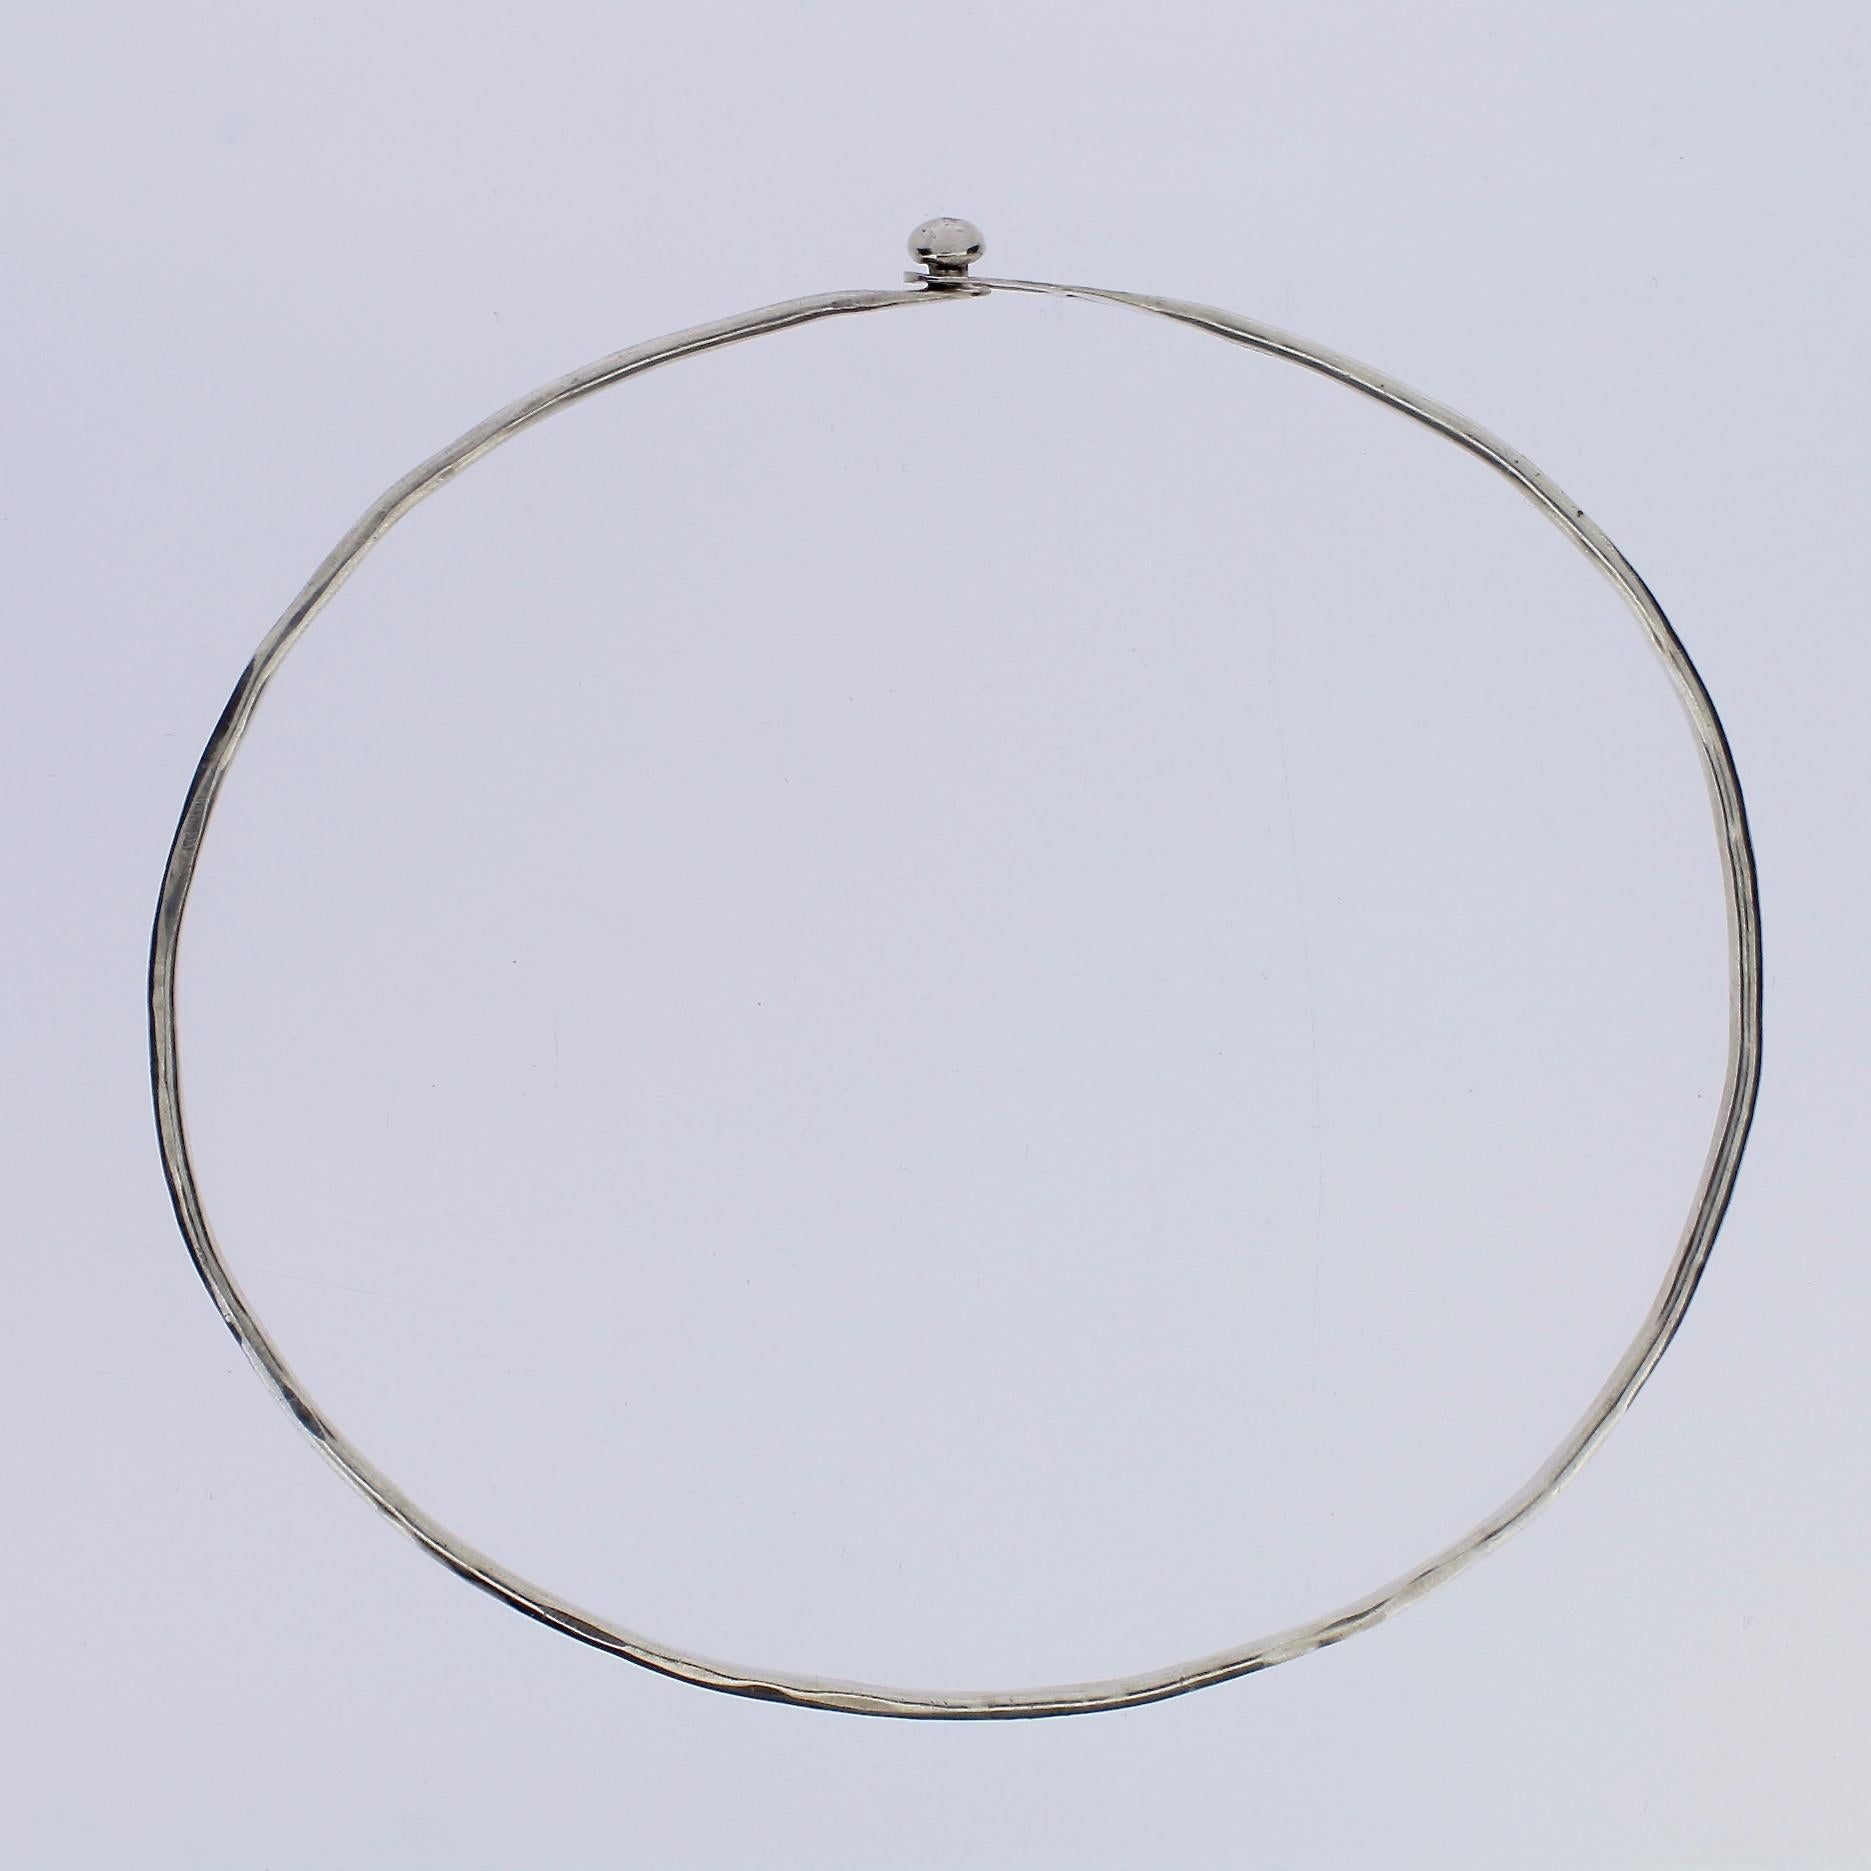 A rare Arline Fisch modernist collar or choker necklace in sterling silver.

Arline Fisch is an important Modernist American artist and jewelry maker based in NYC. Her work is in many of the top public and private collections throughout the world,